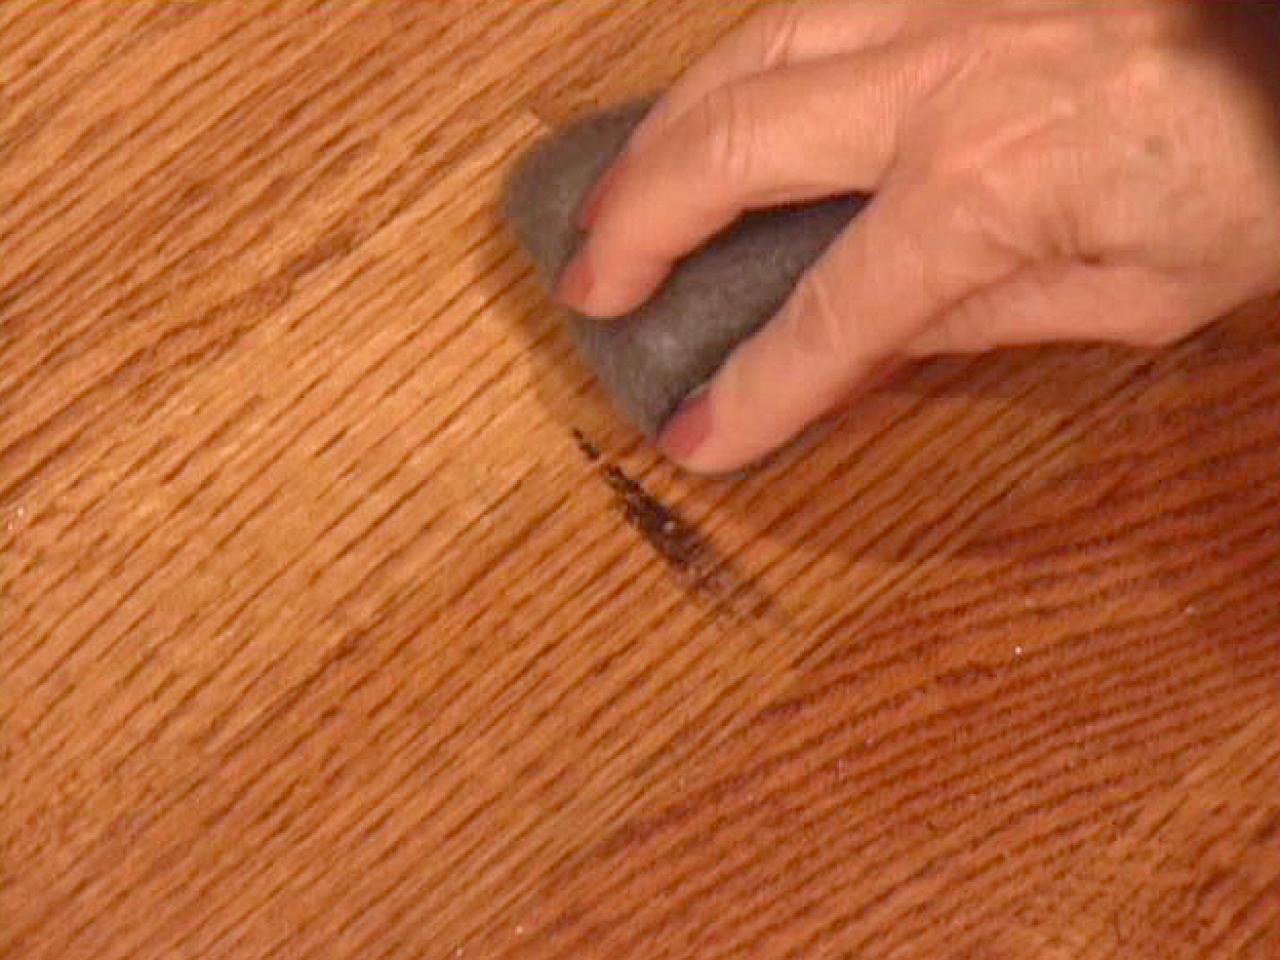 How To Touch Up Wood Floors Tos Diy, How To Clean Up Hardwood Floors